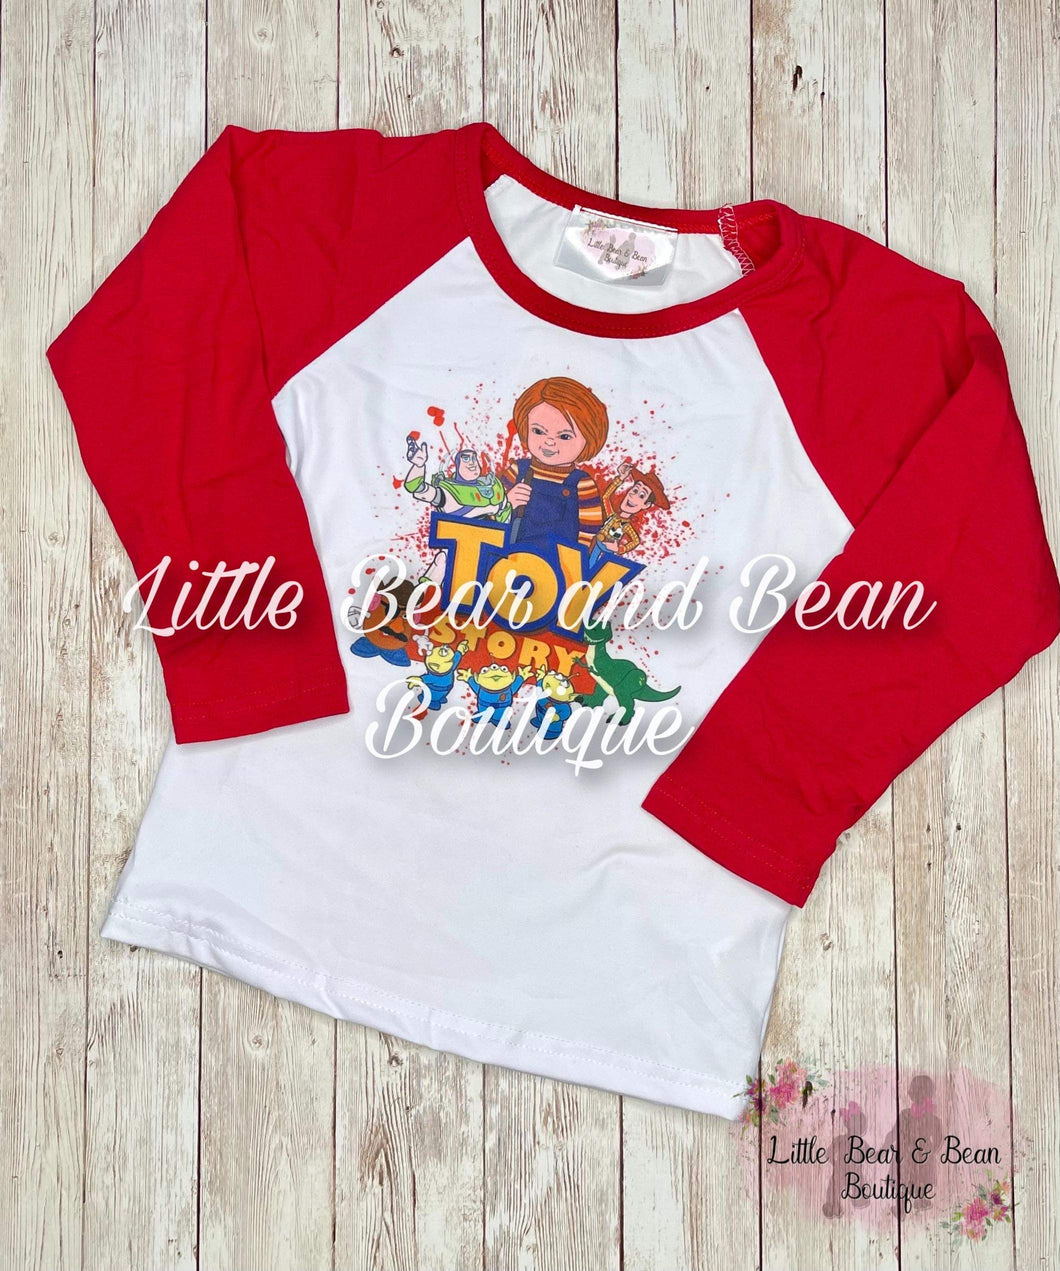 Chucky and Favorite Toys Shirt